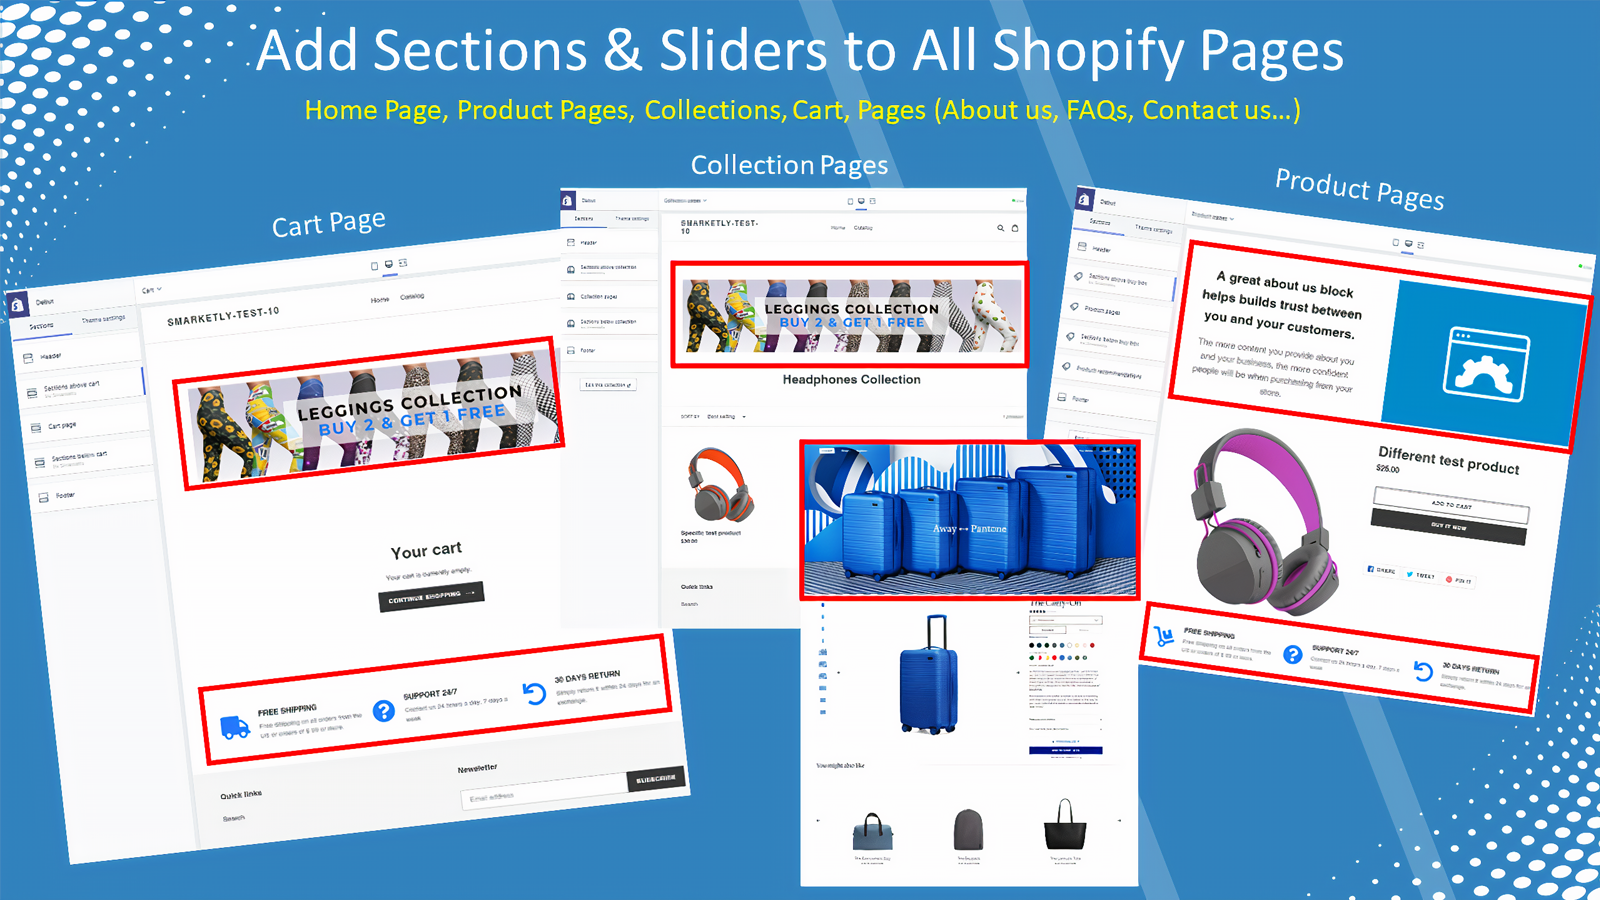 Add Sections & Sliders to All Shopify Pages